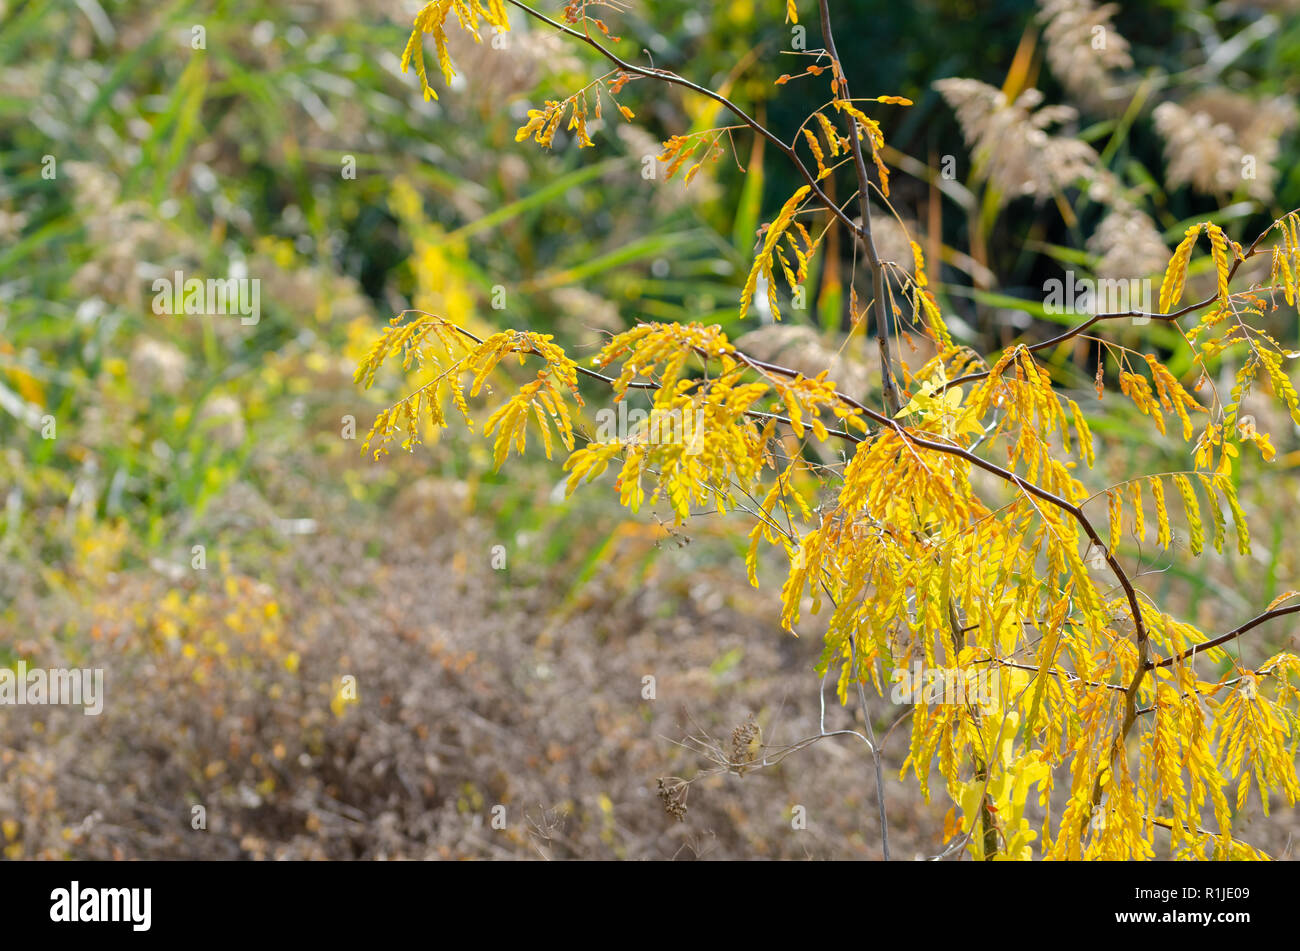 Autumn image of weeds at the roadside Stock Photo